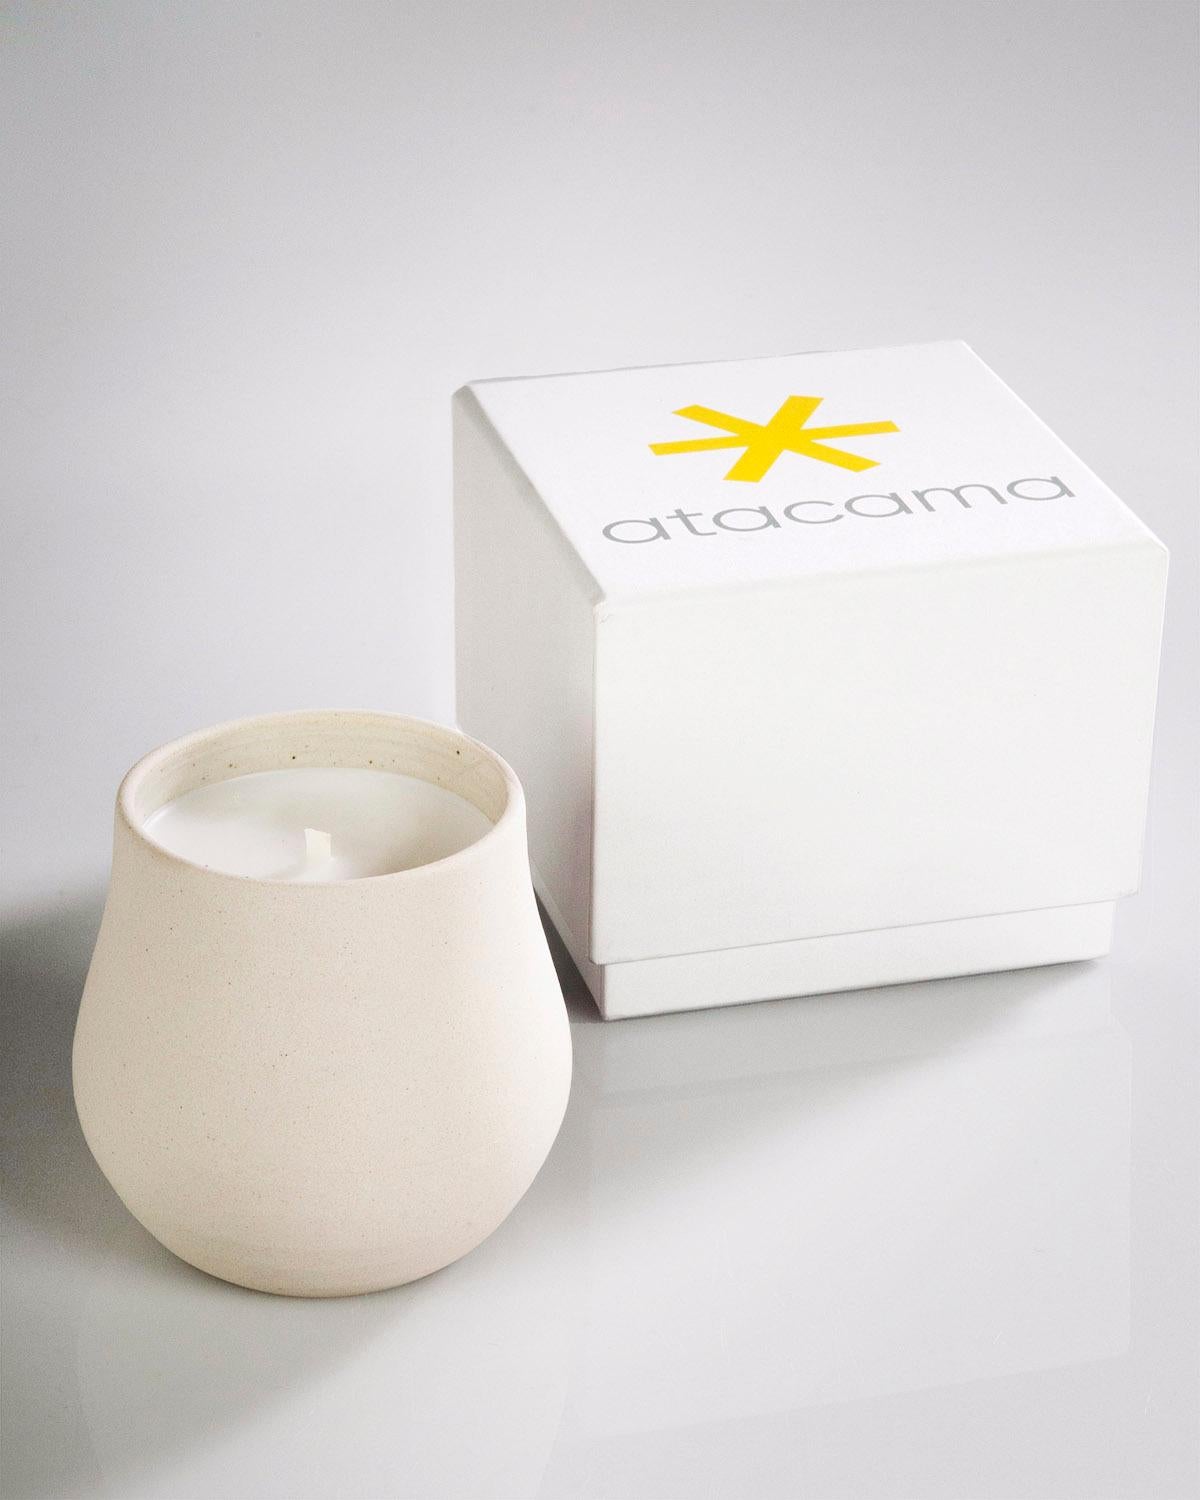 Organic Modern Artisan Scented Candles in Handmade Ceramic Vessels, White, in Stock For Sale